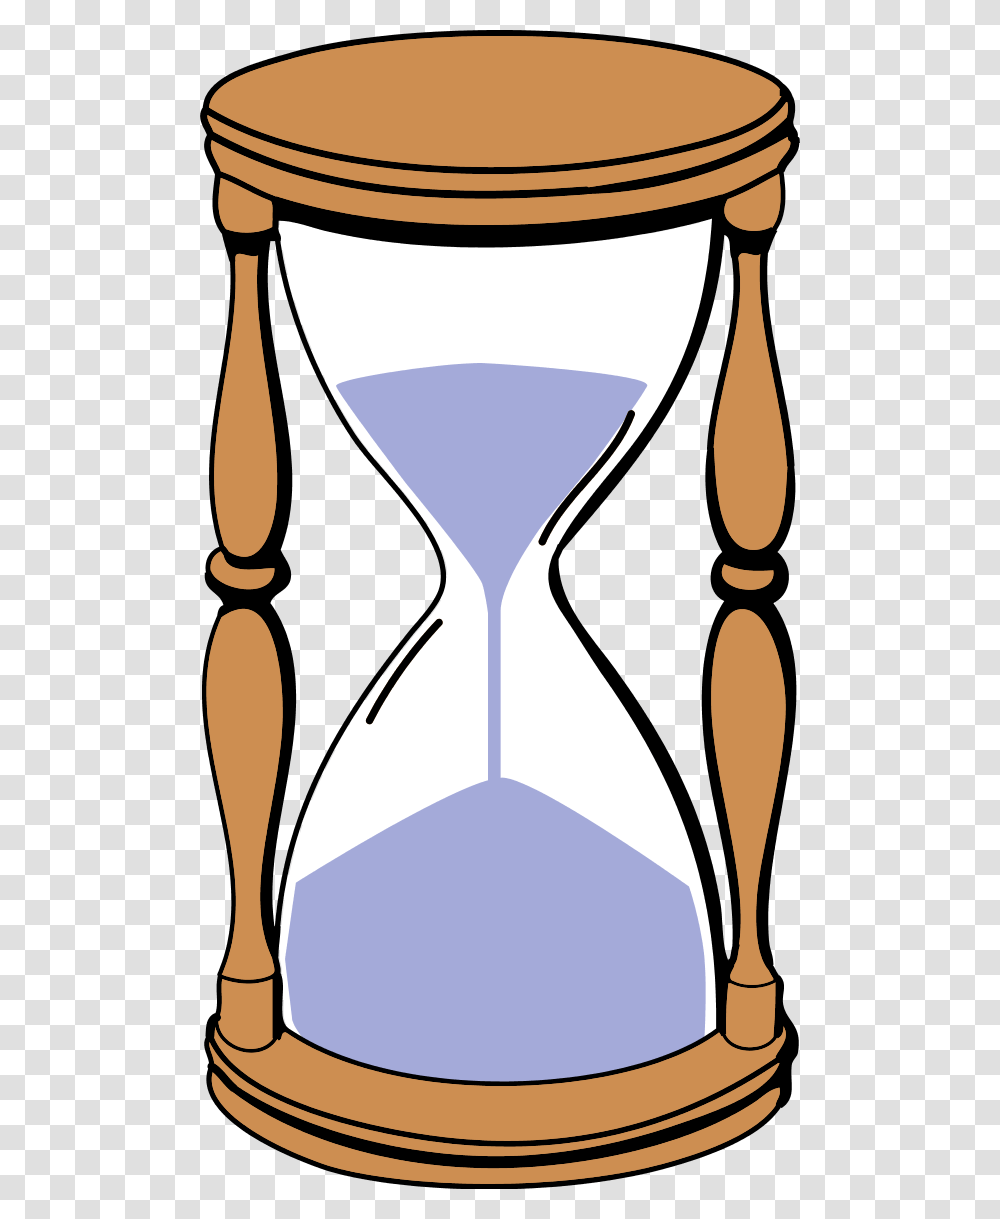 Point Of Sale Machine Classic Old Cartoon Hourglass Sand Timer Clipart Transparent Png